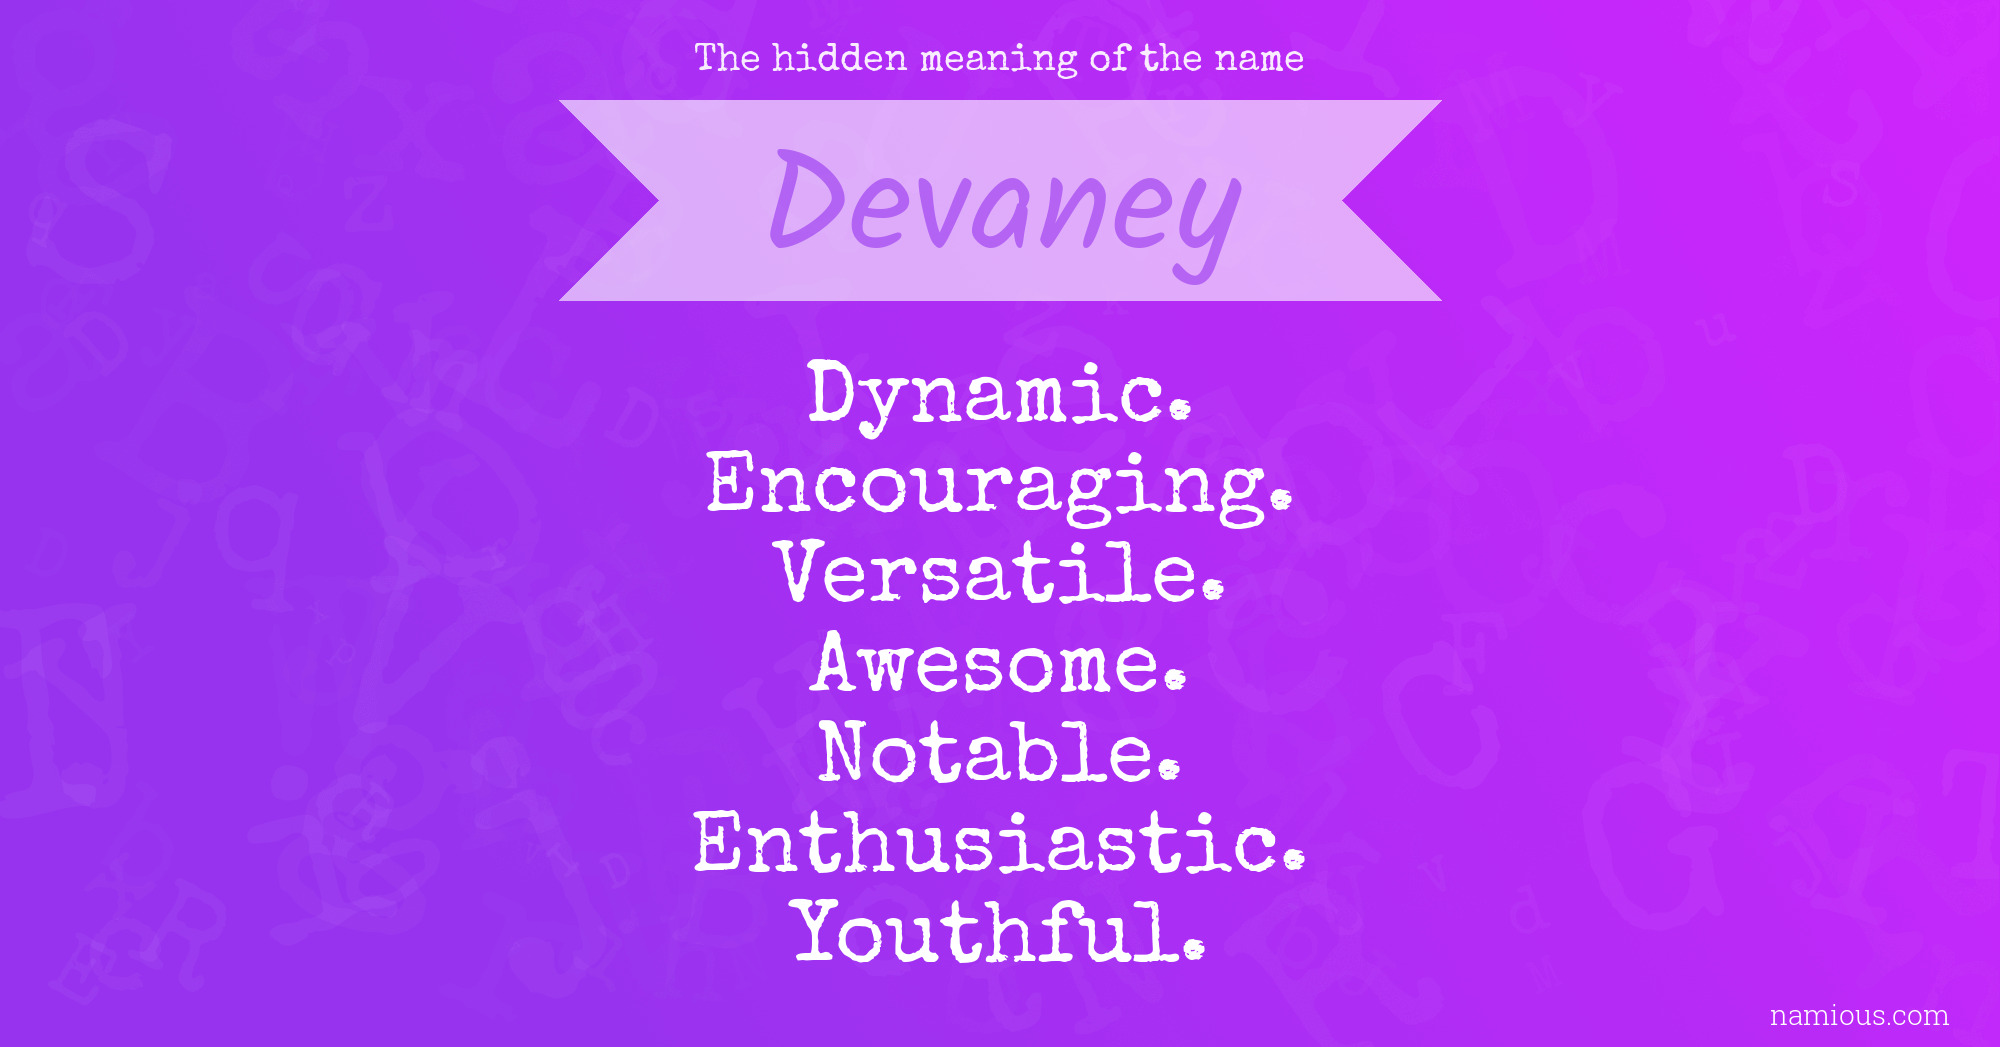 The hidden meaning of the name Devaney